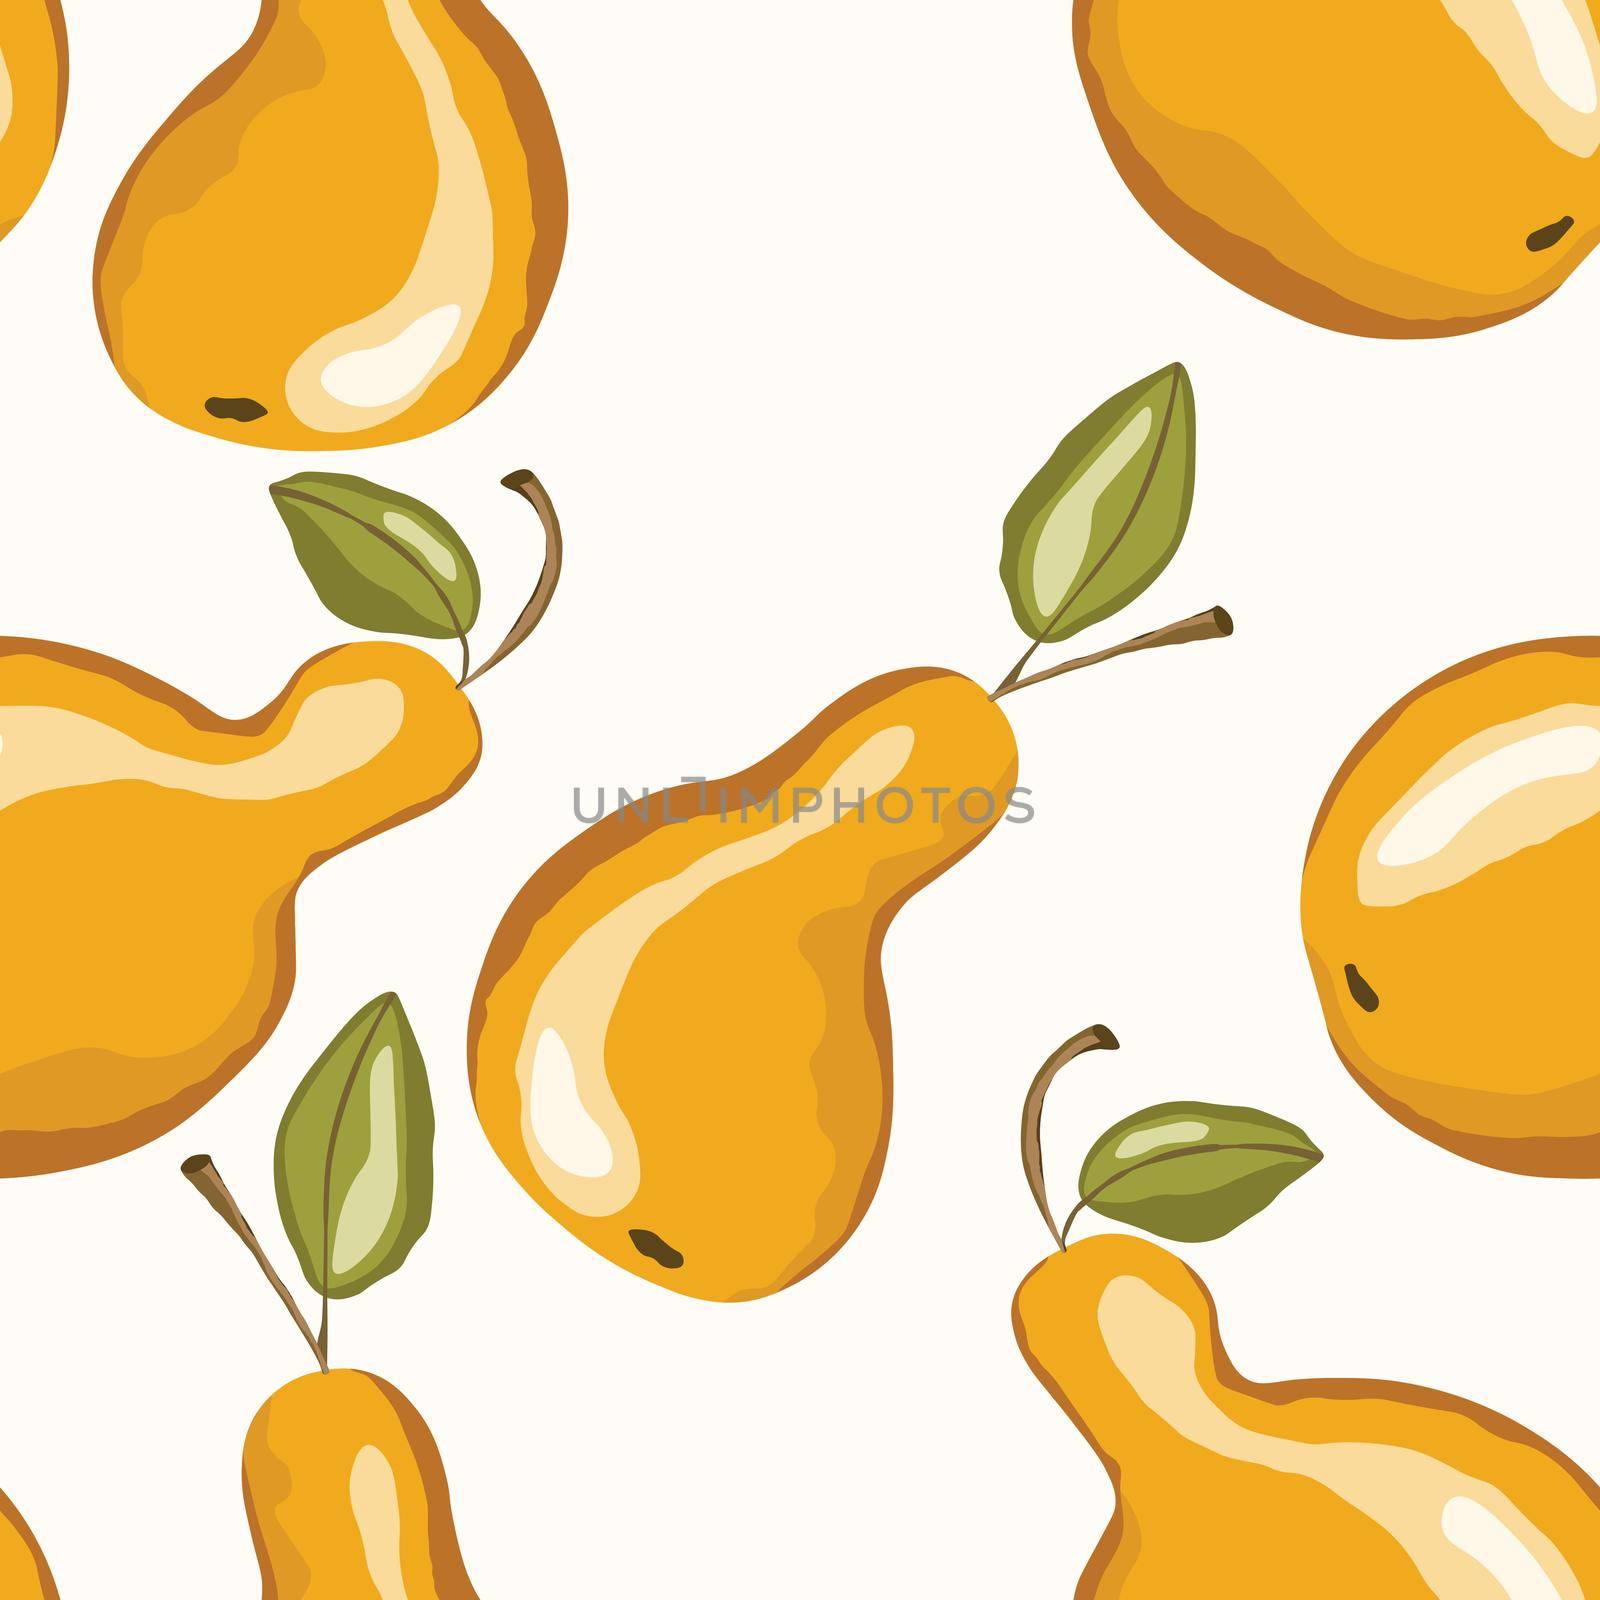 Seamless pattern with pear on white background. Natural delicious fresh ripe tasty fruit. Vector illustration for print, fabric, textile, banner, other design. Stylized pears with leaves. Food concept by allaku